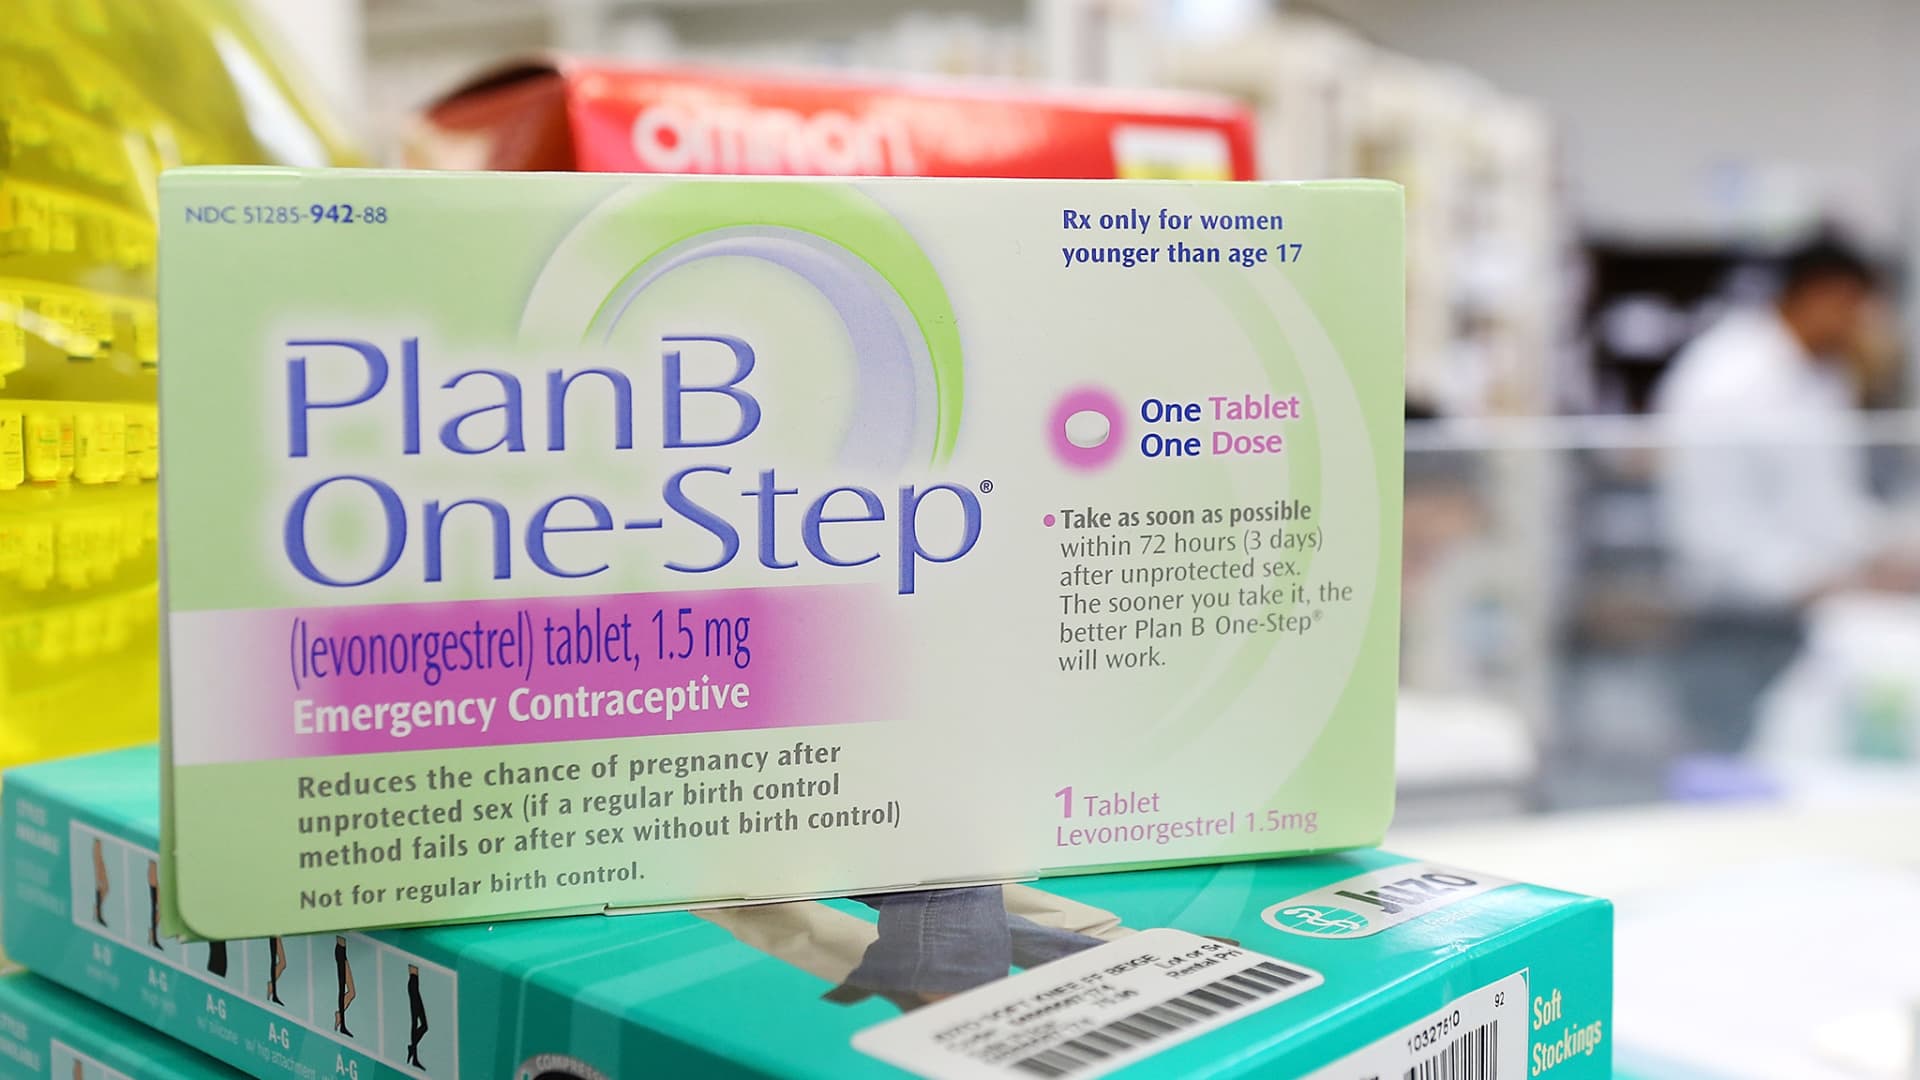 Amazon limits how many Plan B pills you can buy as demand surges